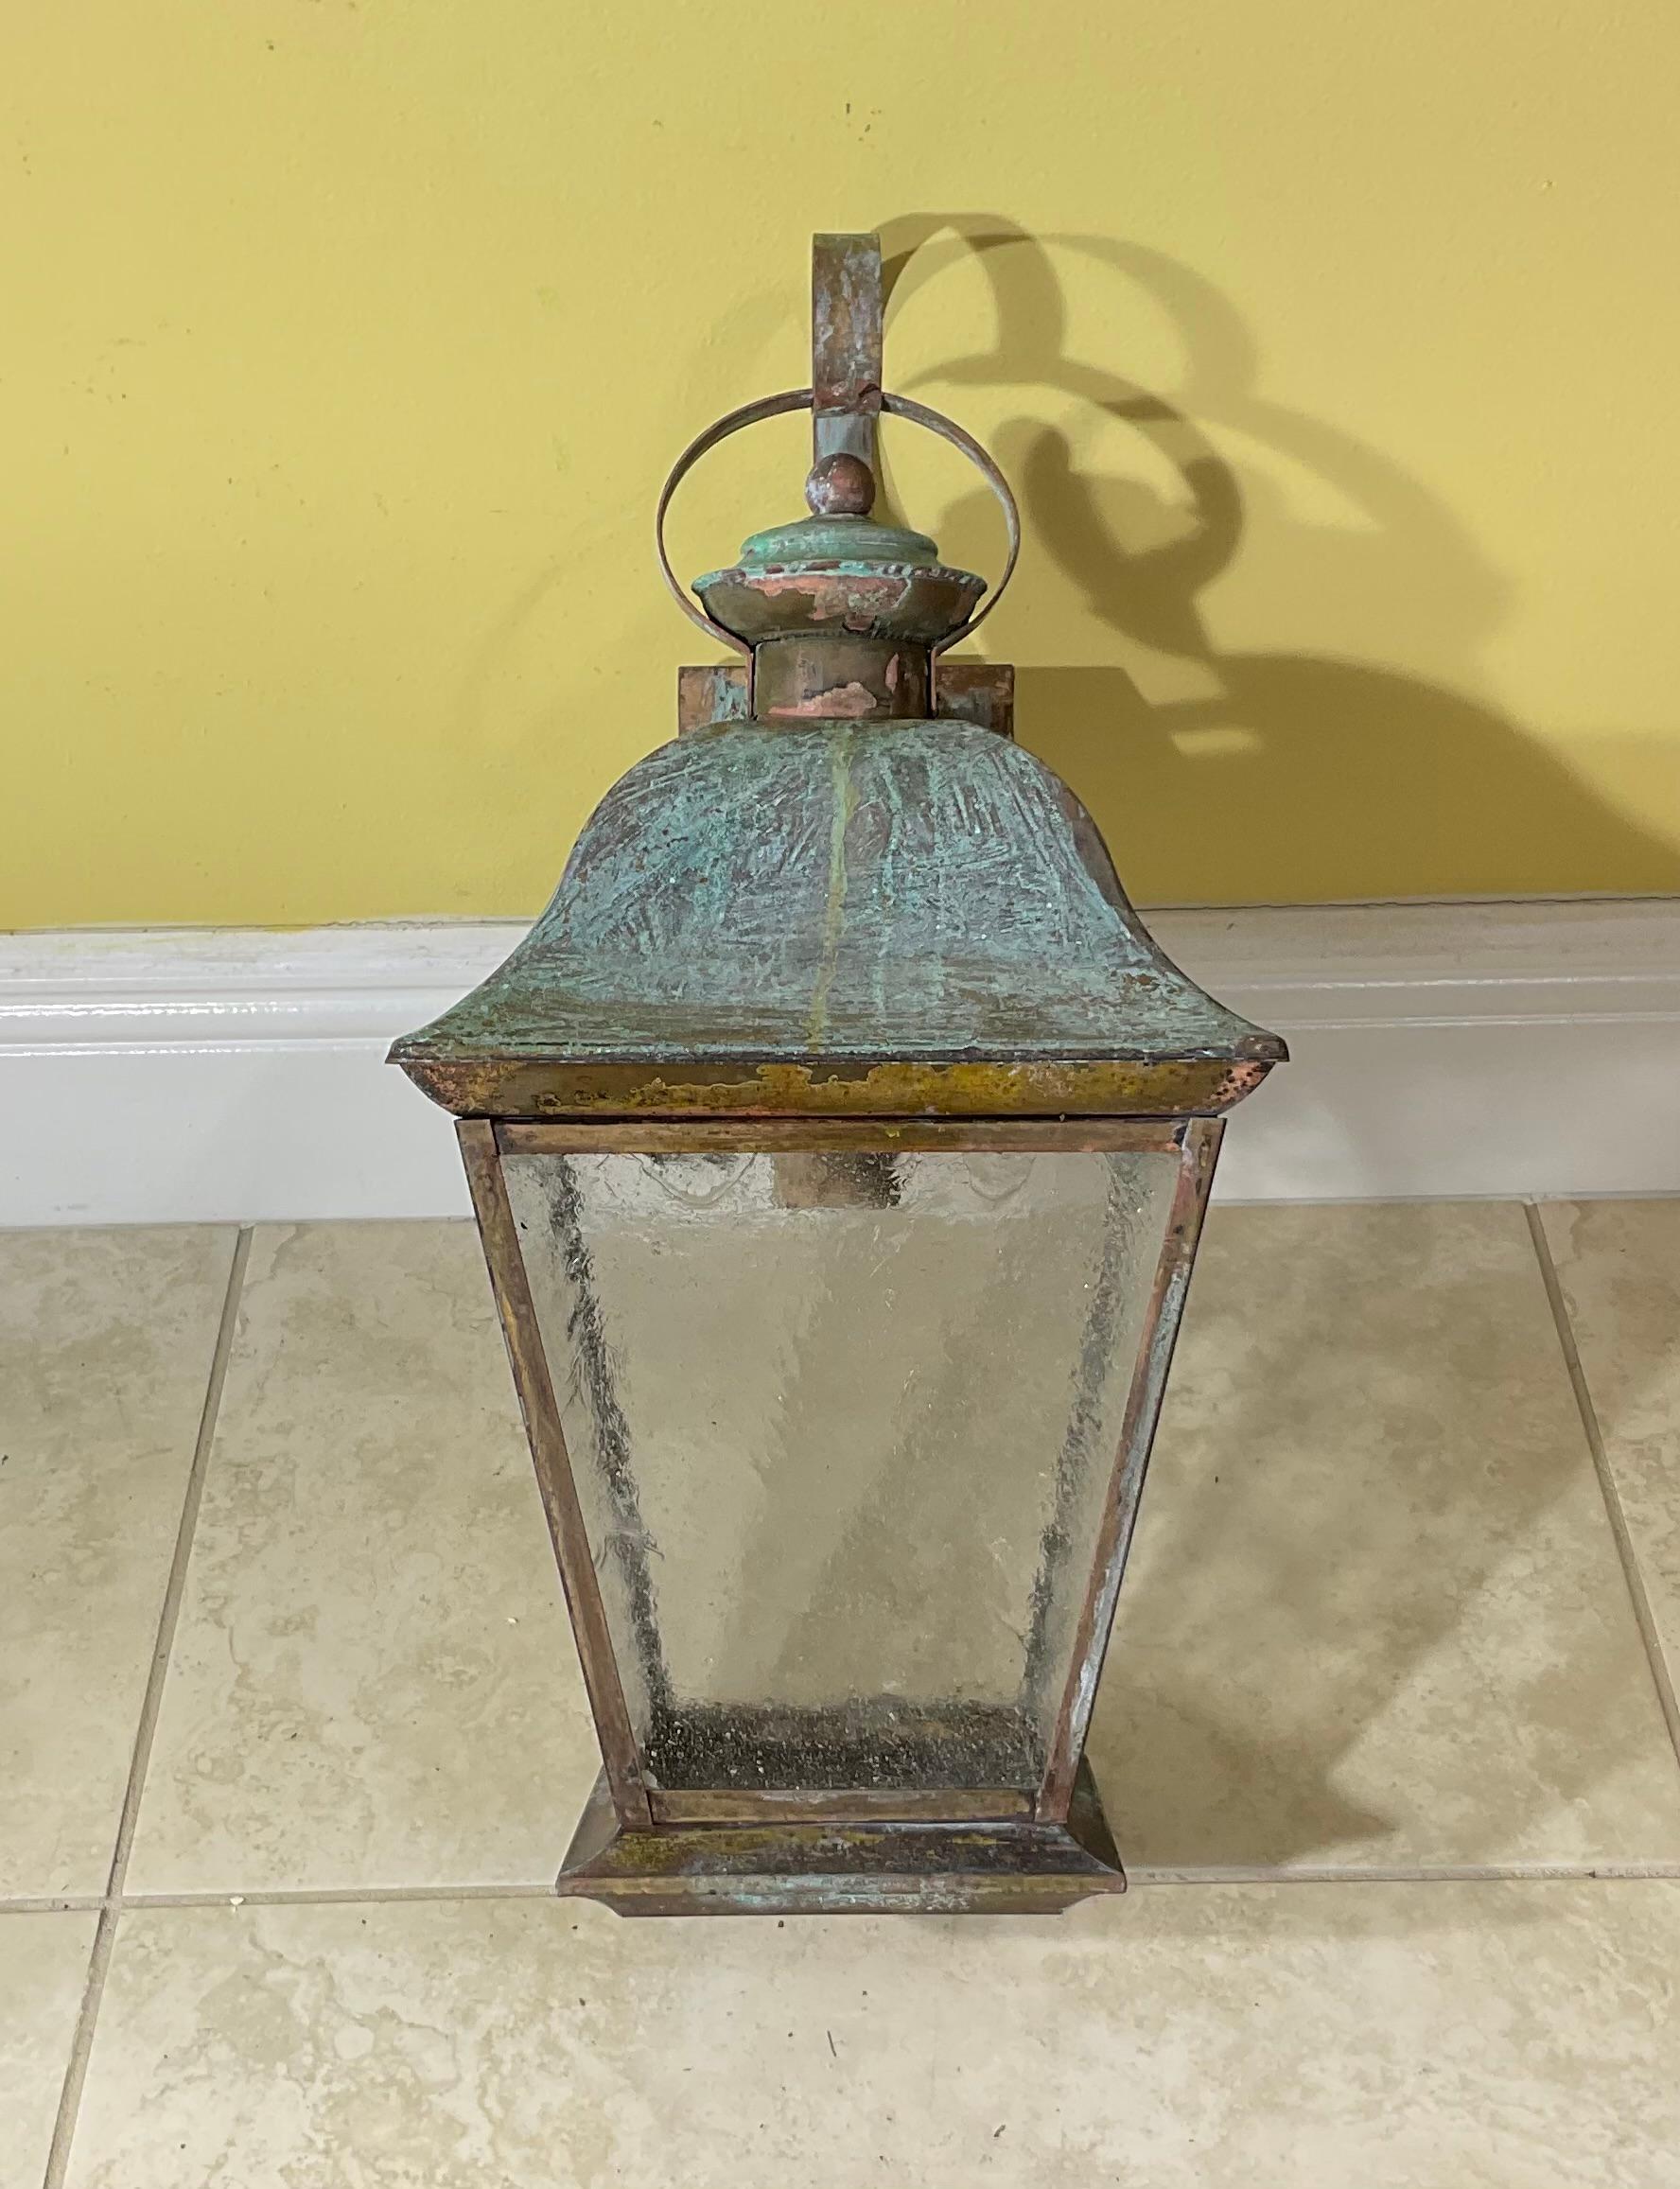 Elegant single wall lantern ,hand crafted from solid brass with one 60/watt light ,  four sides of textured glass. Beautiful patina.
 Suitable for wet locations, electrified and ready to use.
decorative lantern indoor or outdoor.